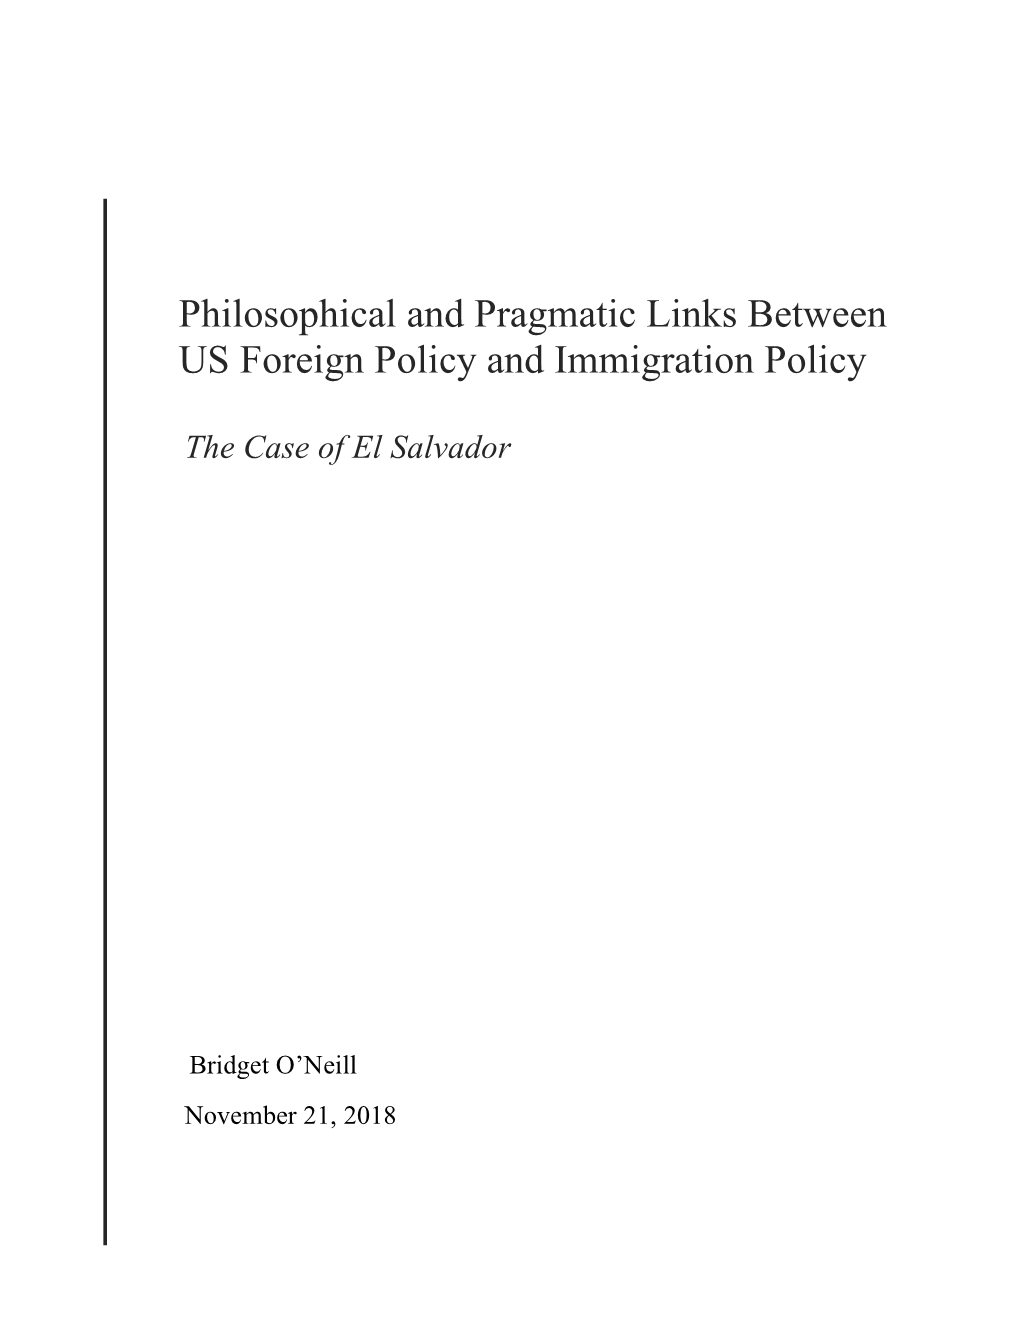 Philosophical and Pragmatic Links Between US Foreign Policy and Immigration Policy